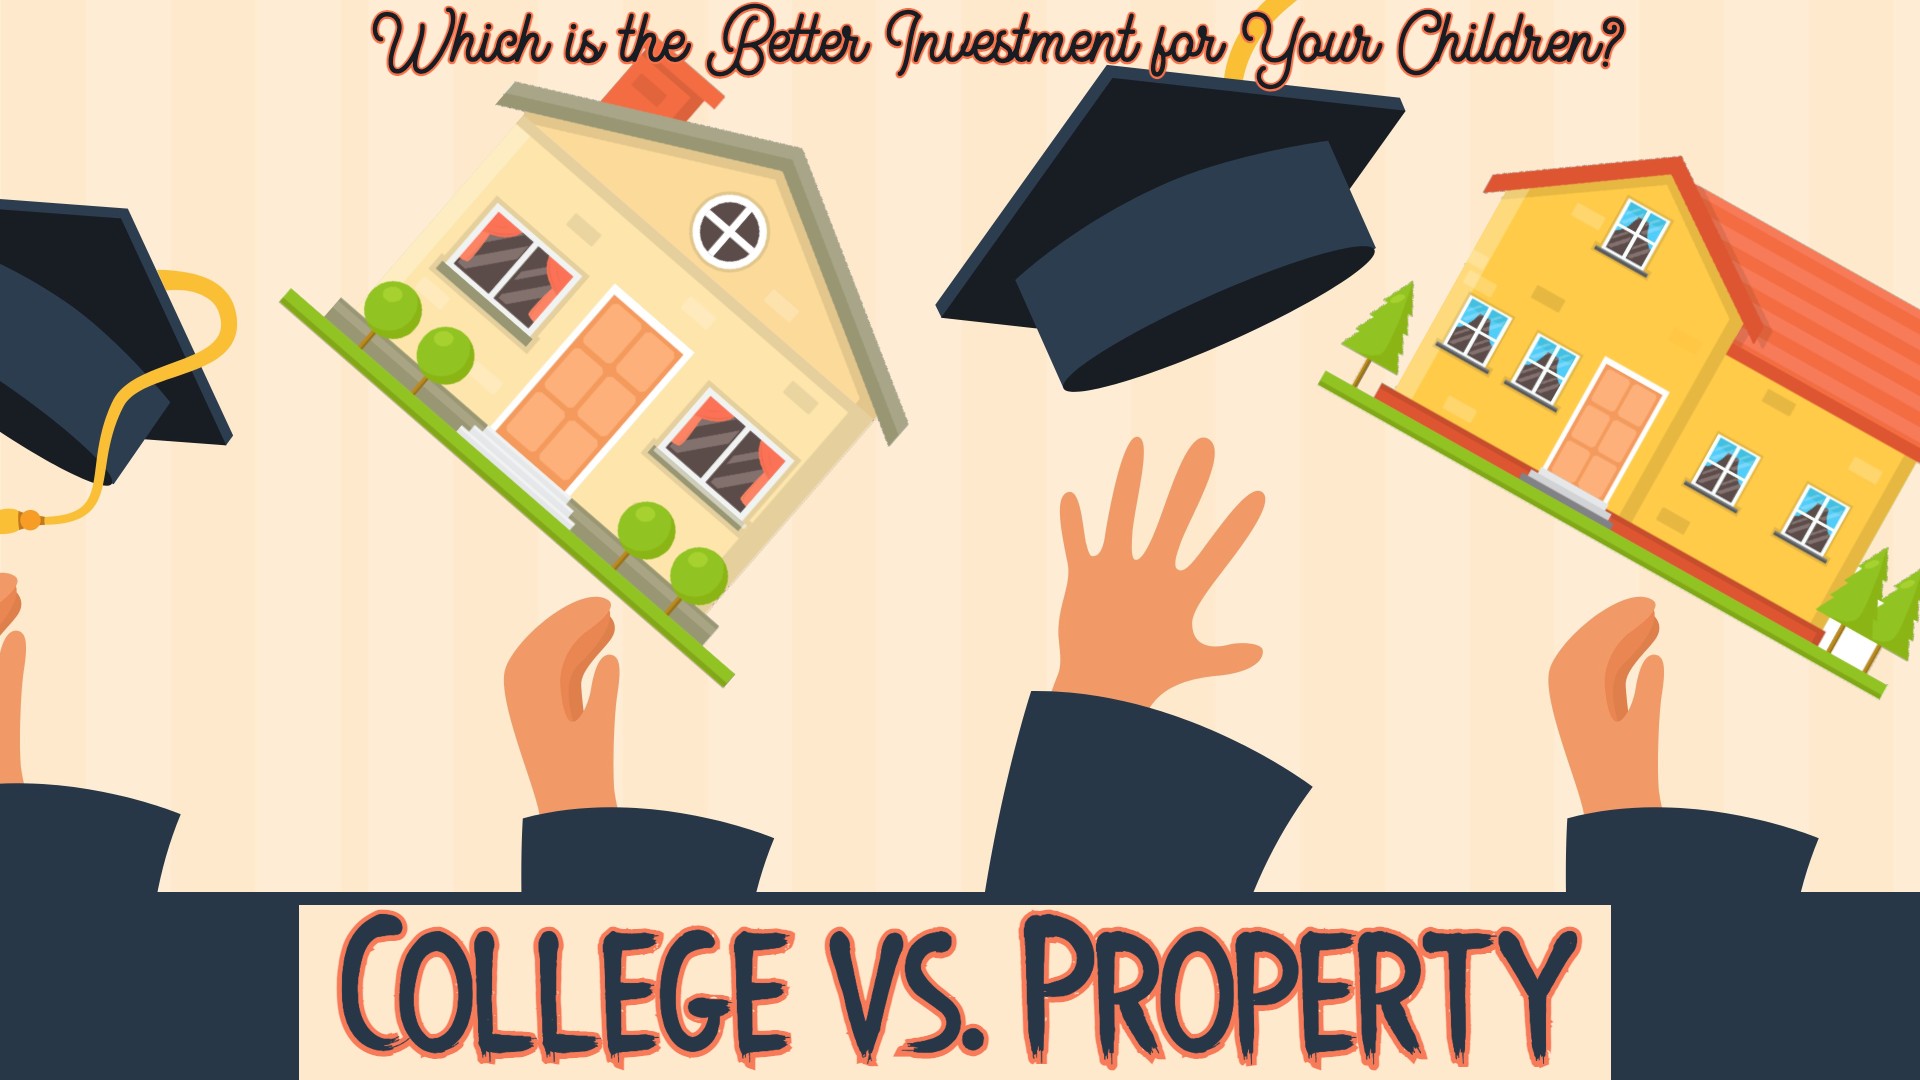 College vs. Property: Which is the Better Investment for Your Children?